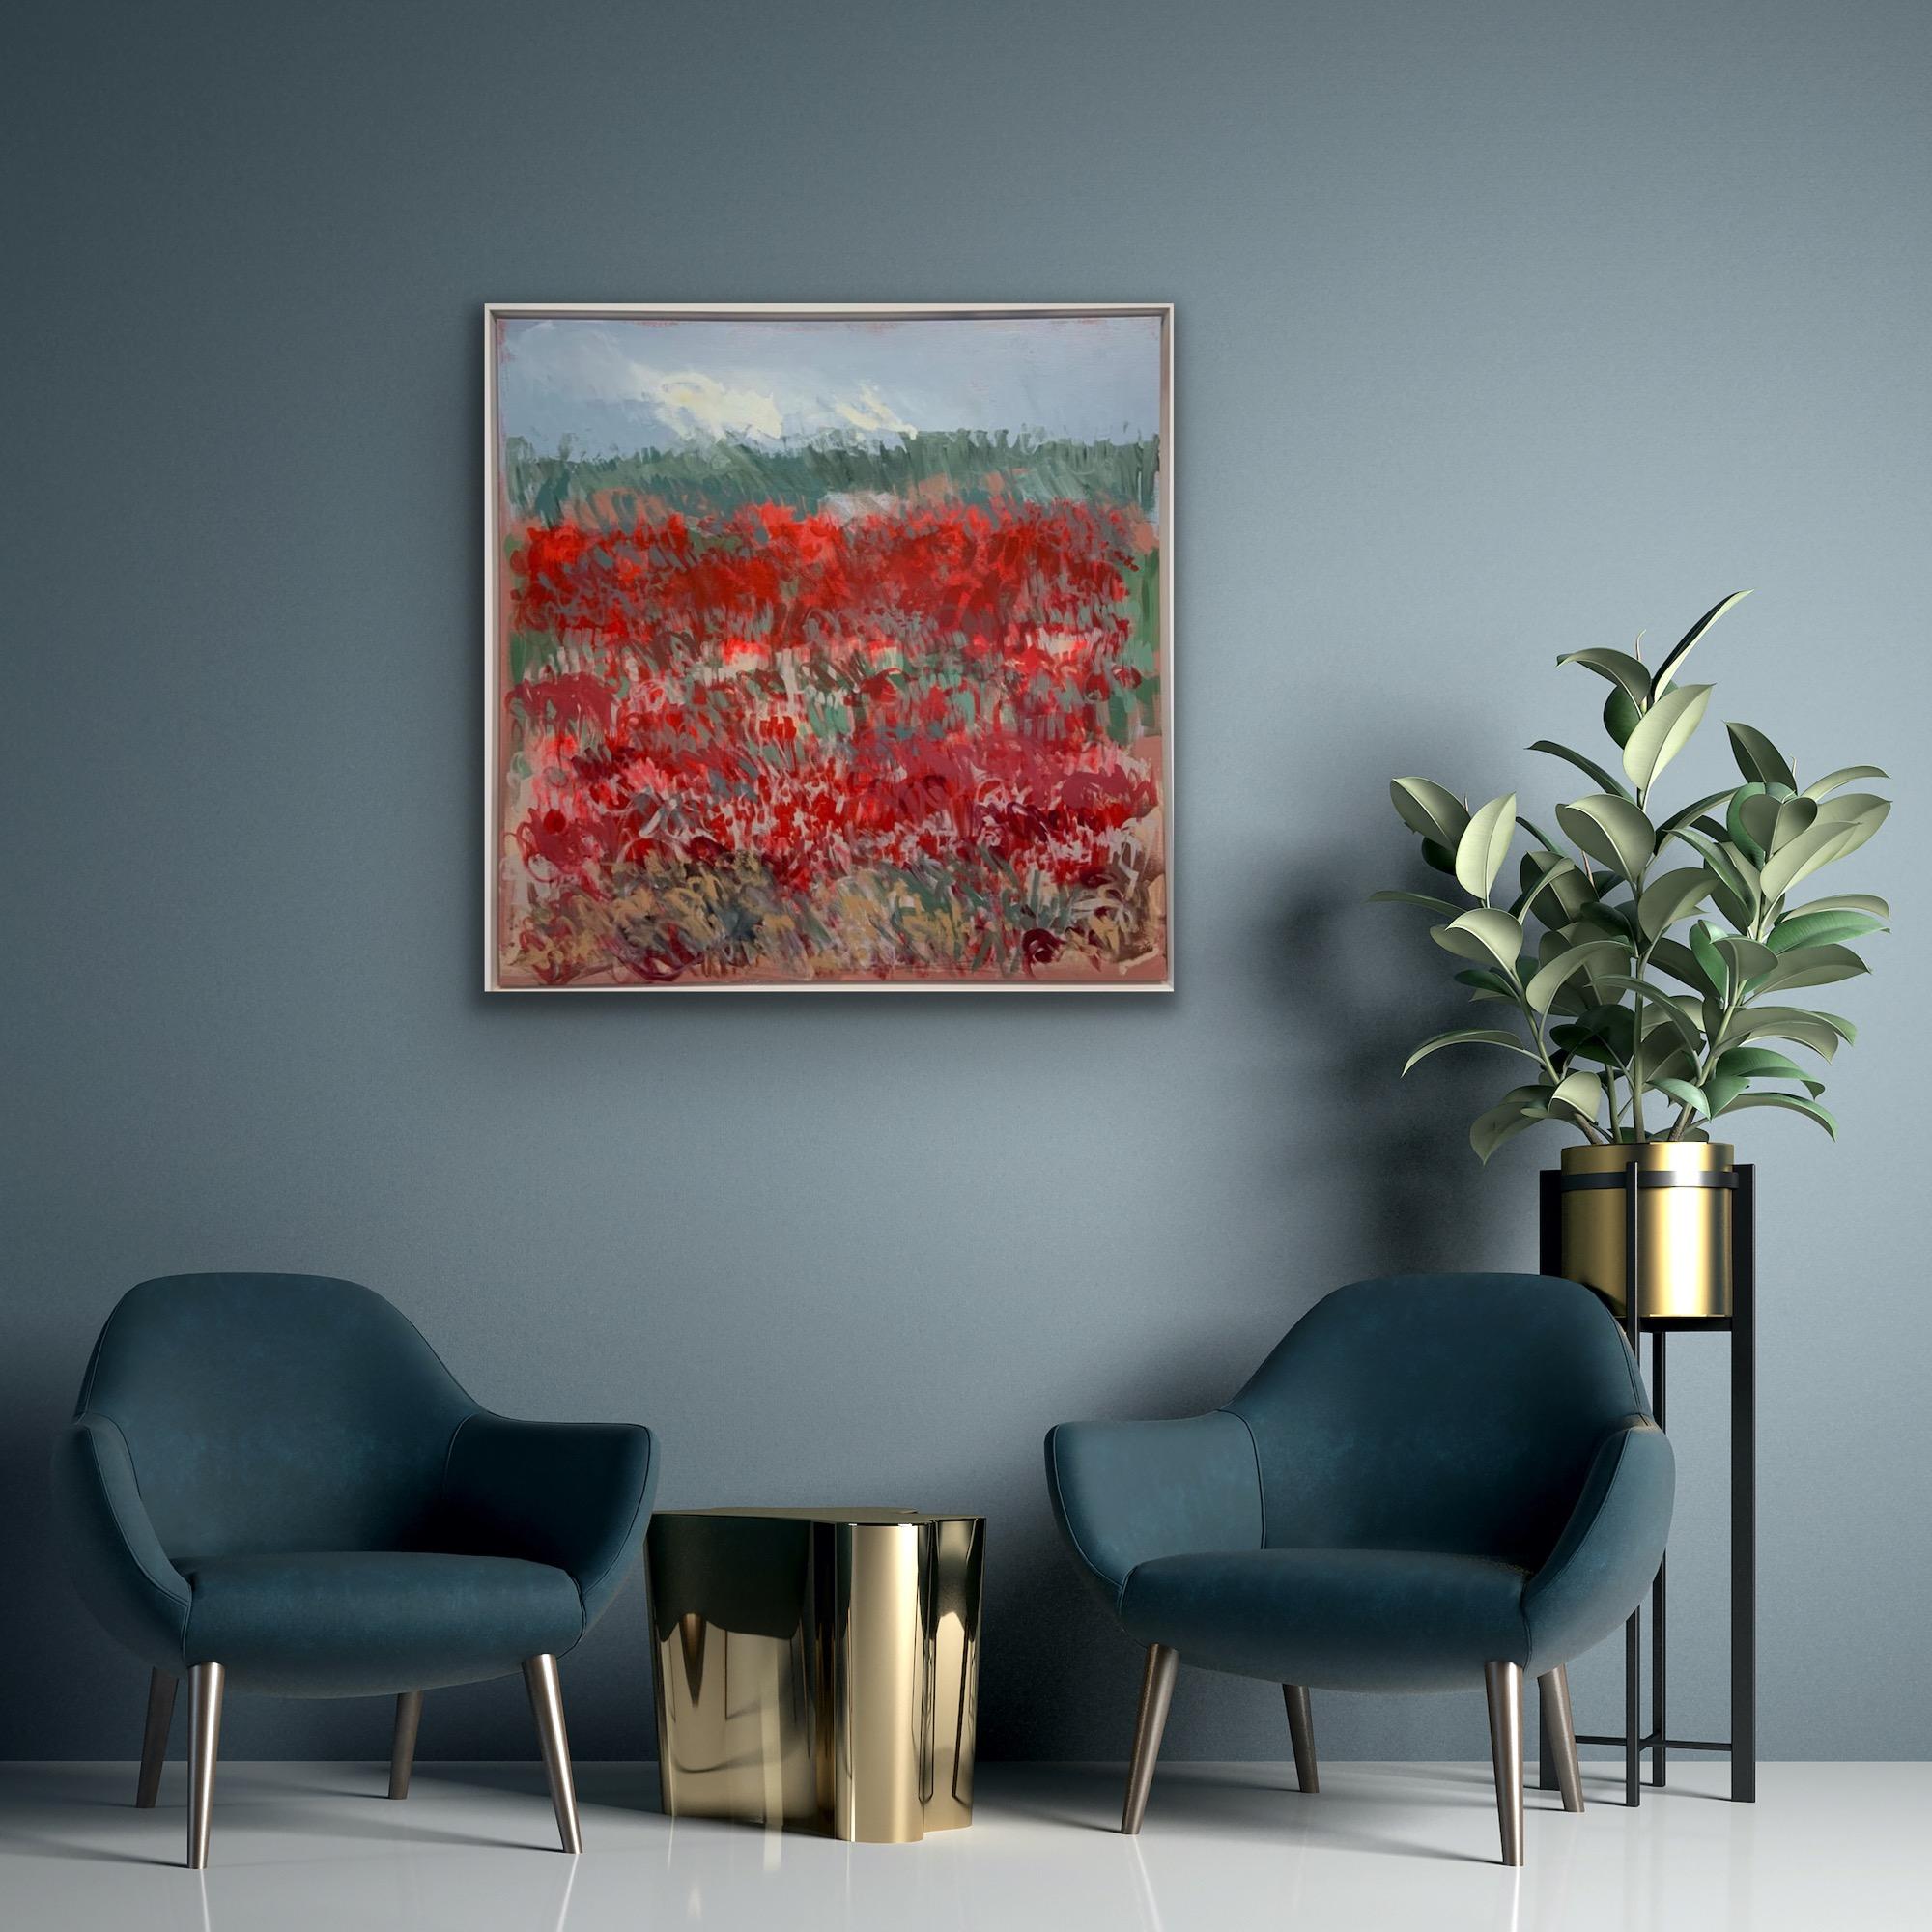 Poppies by the Dunes abstract landscape painting by British artist Claire Oxley 4